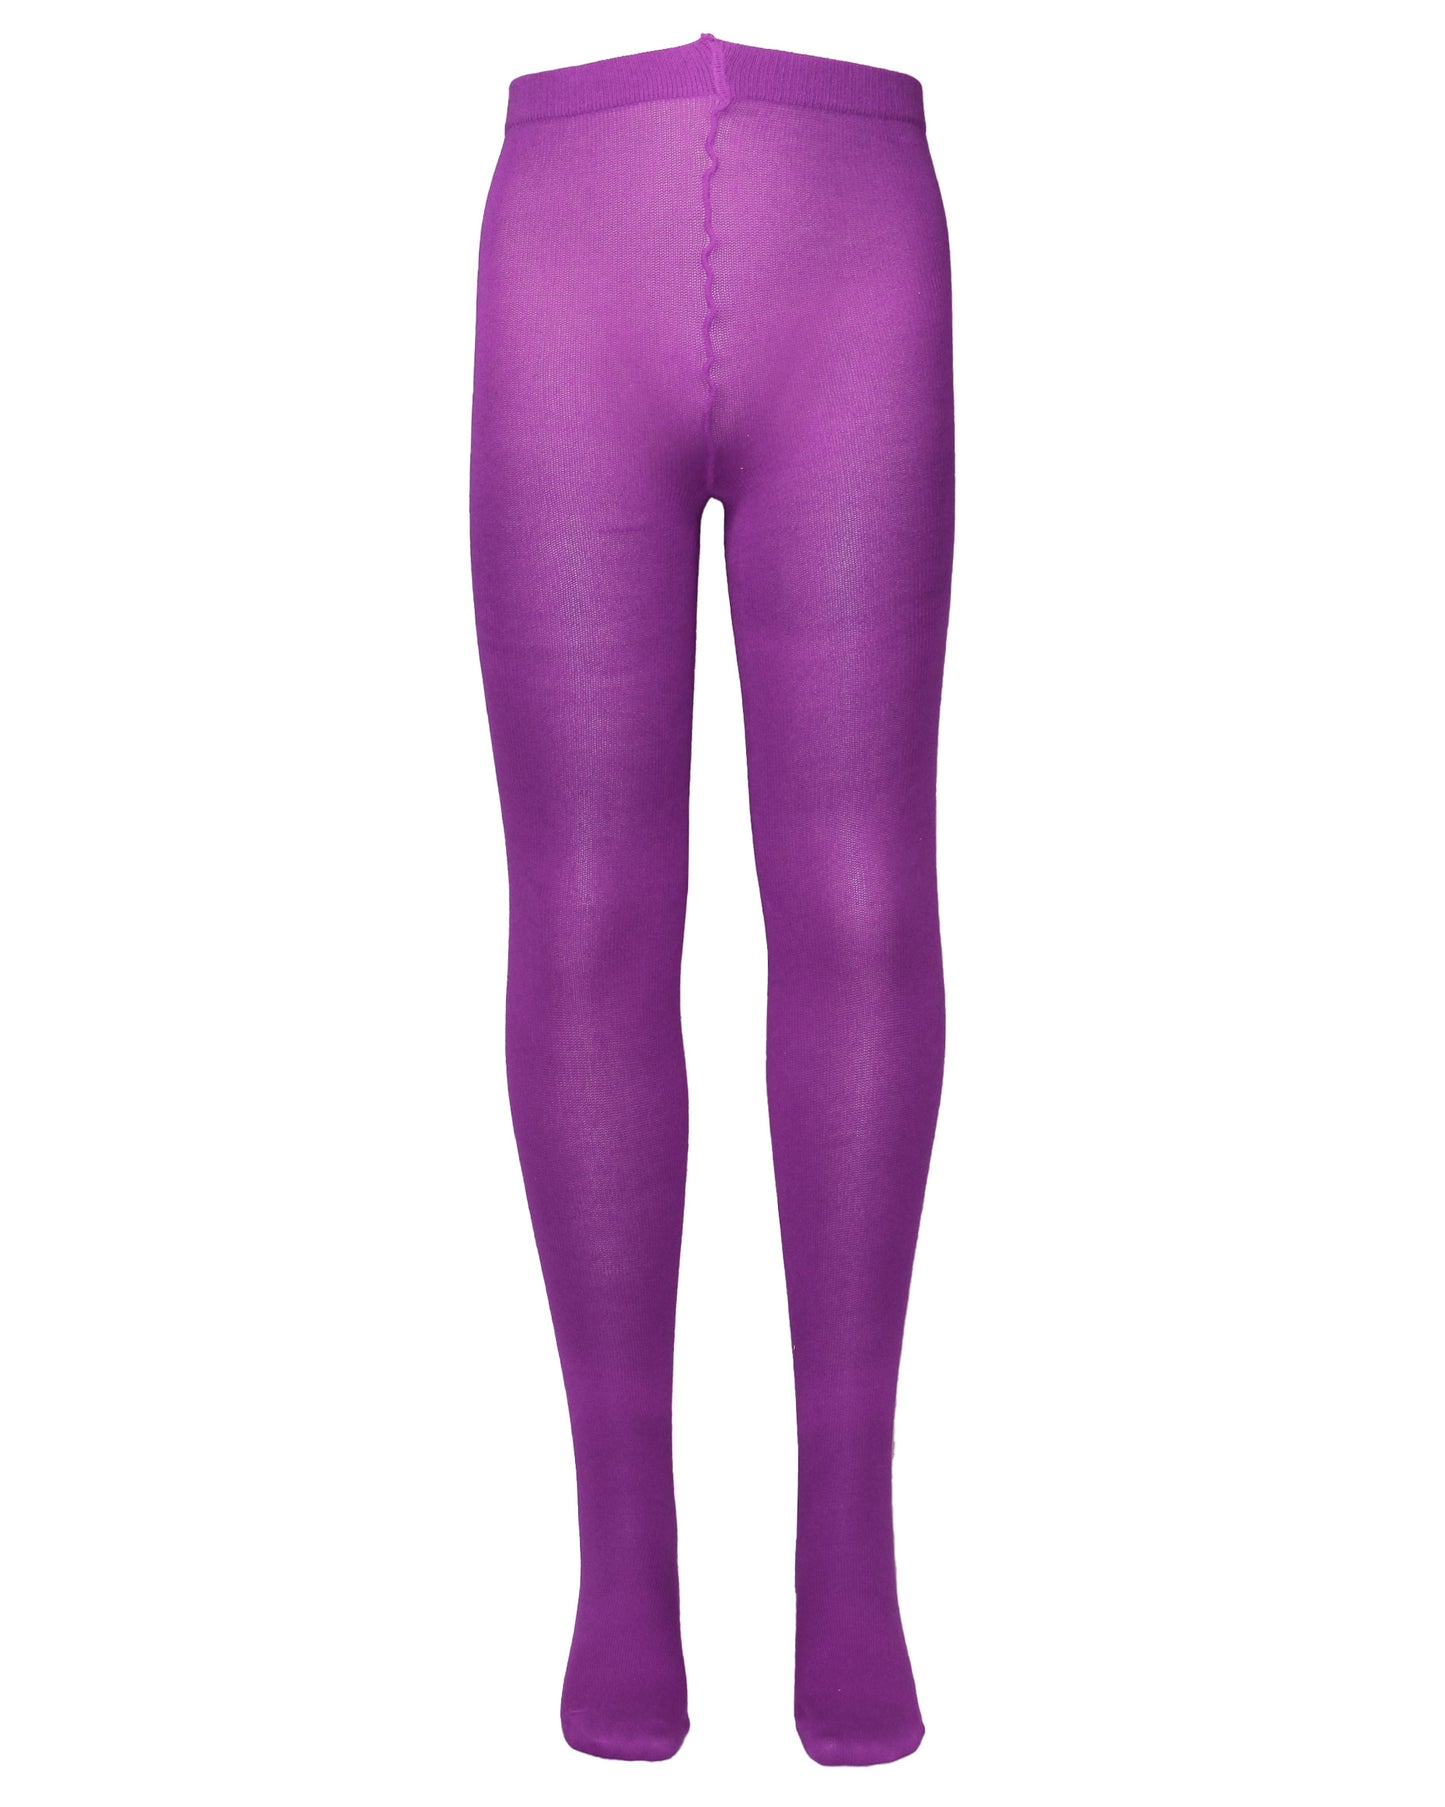 Omsa MiniCotton Collant - Bright purple soft cotton mix knitted tights with a deep comfort waistband and flat seamless toe.